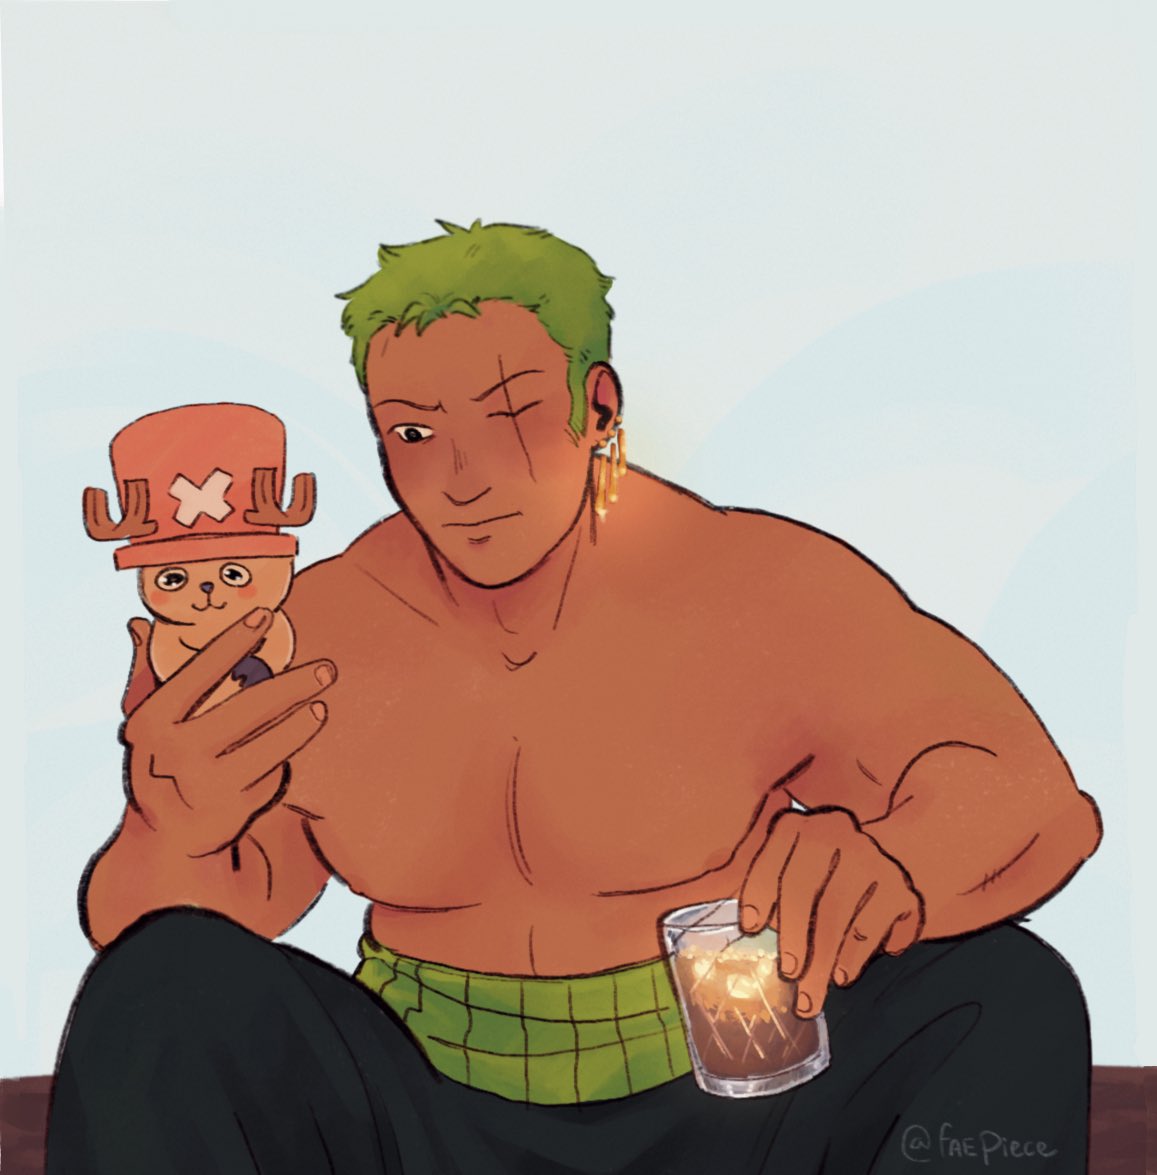 Based on the recent insta pictures of Donlee, he gives zoro vibes 

#ONEPIECE #RoronoaZoro